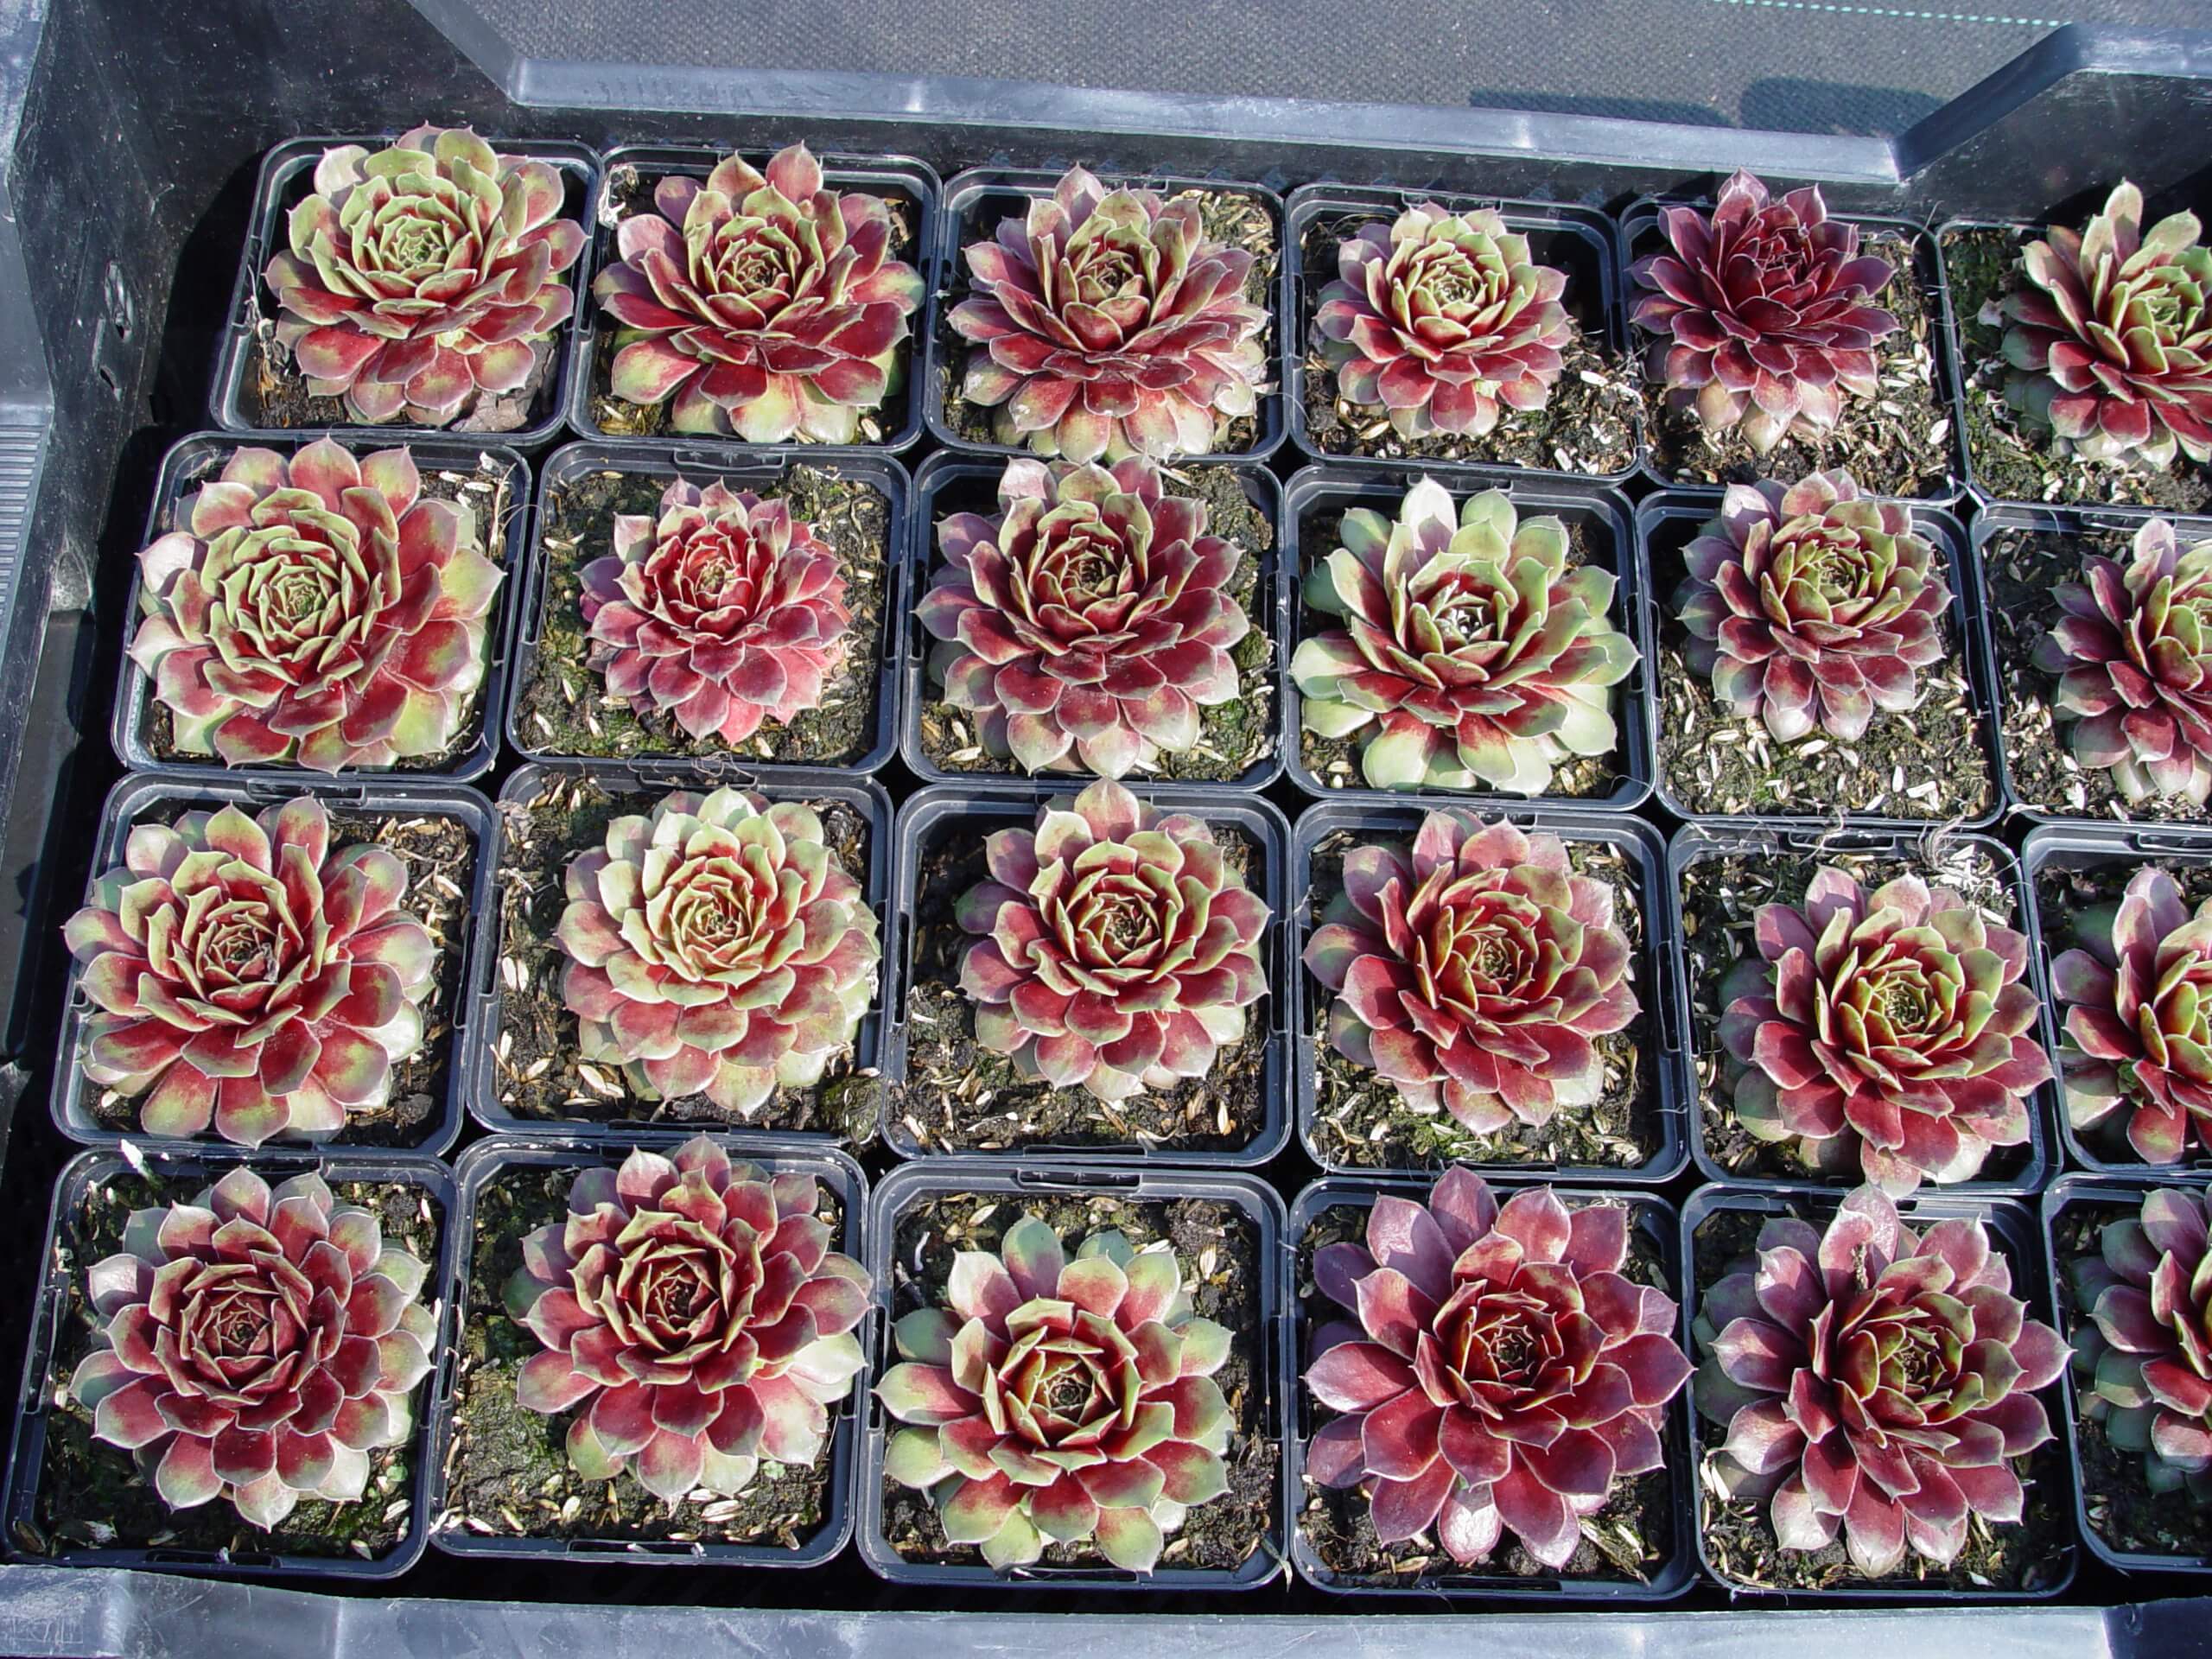 Brightly colored sempervivums, adapted to harsh alpine conditions, do well outdoors in colder climates, provided drainage is assured.